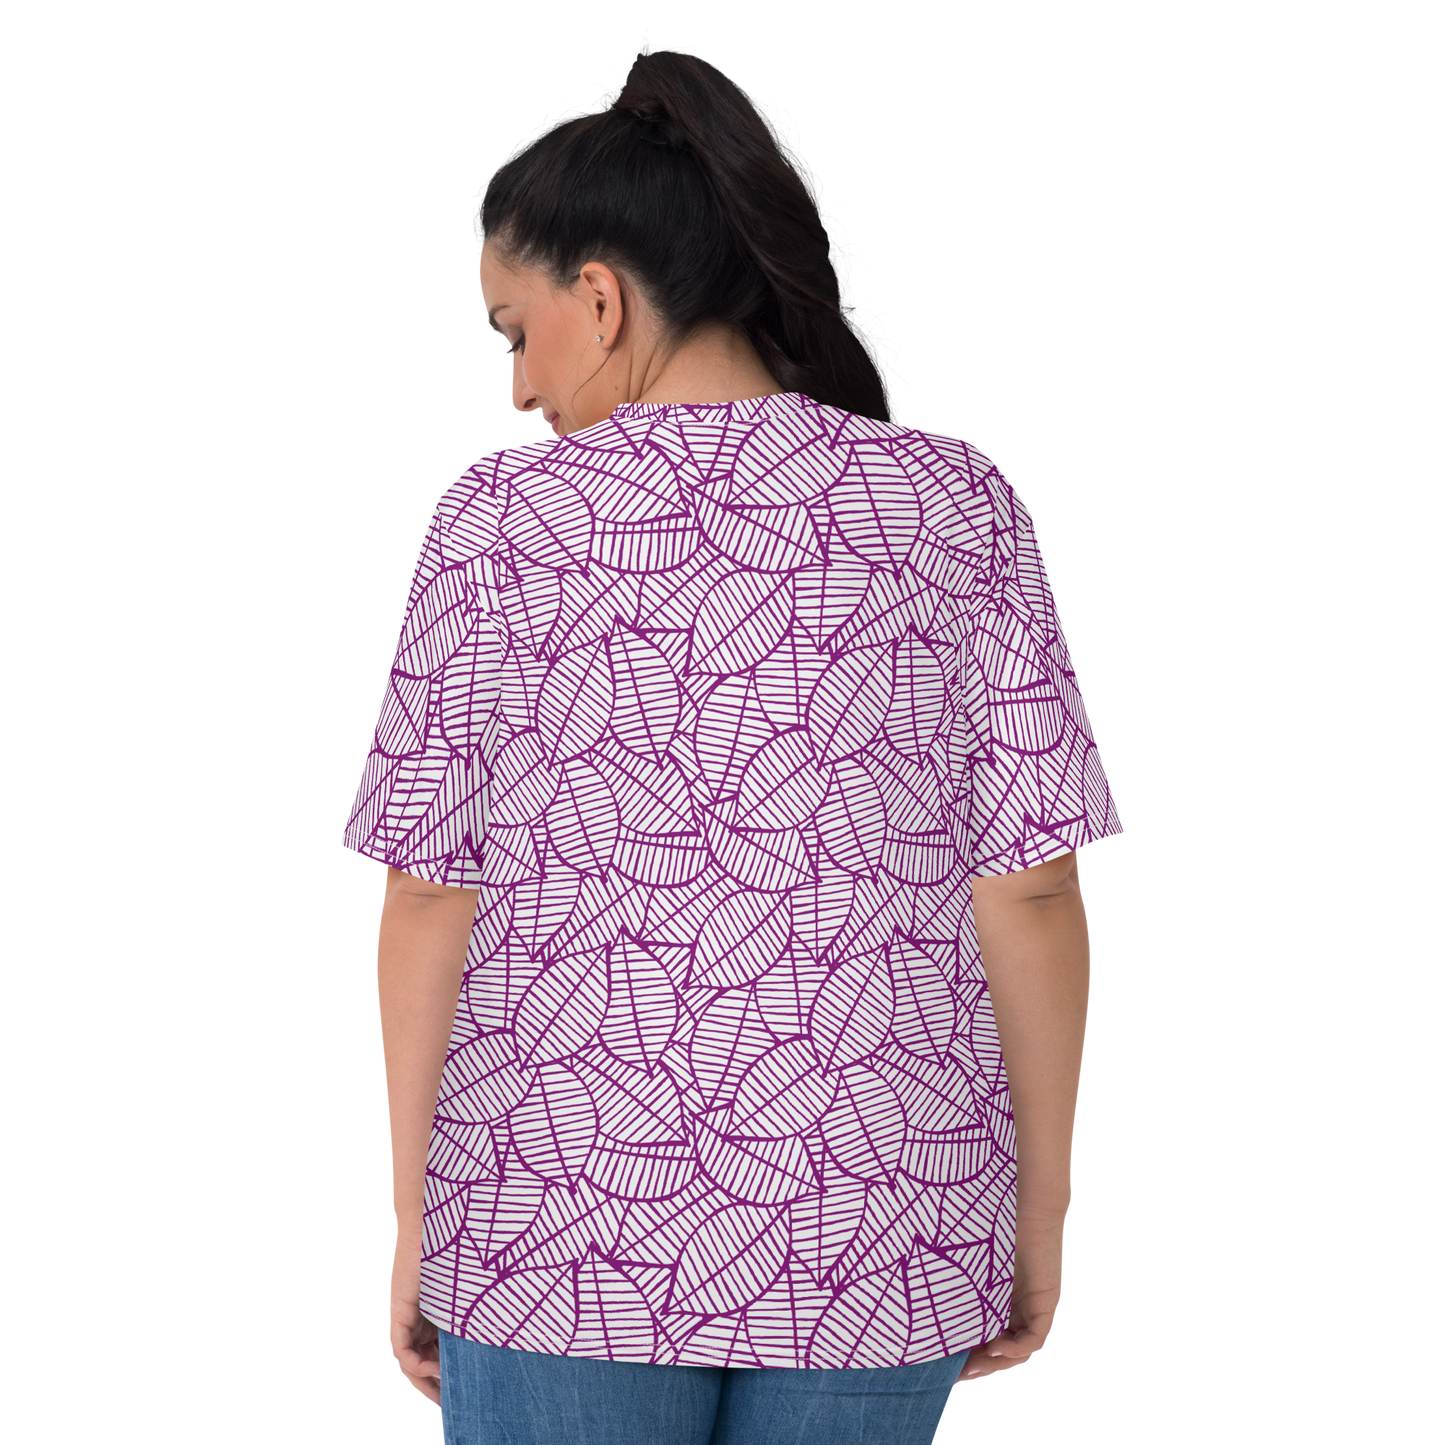 Colorful Fall Leaves | Seamless Patterns | All-Over Print Women's Crew Neck T-Shirt - #7